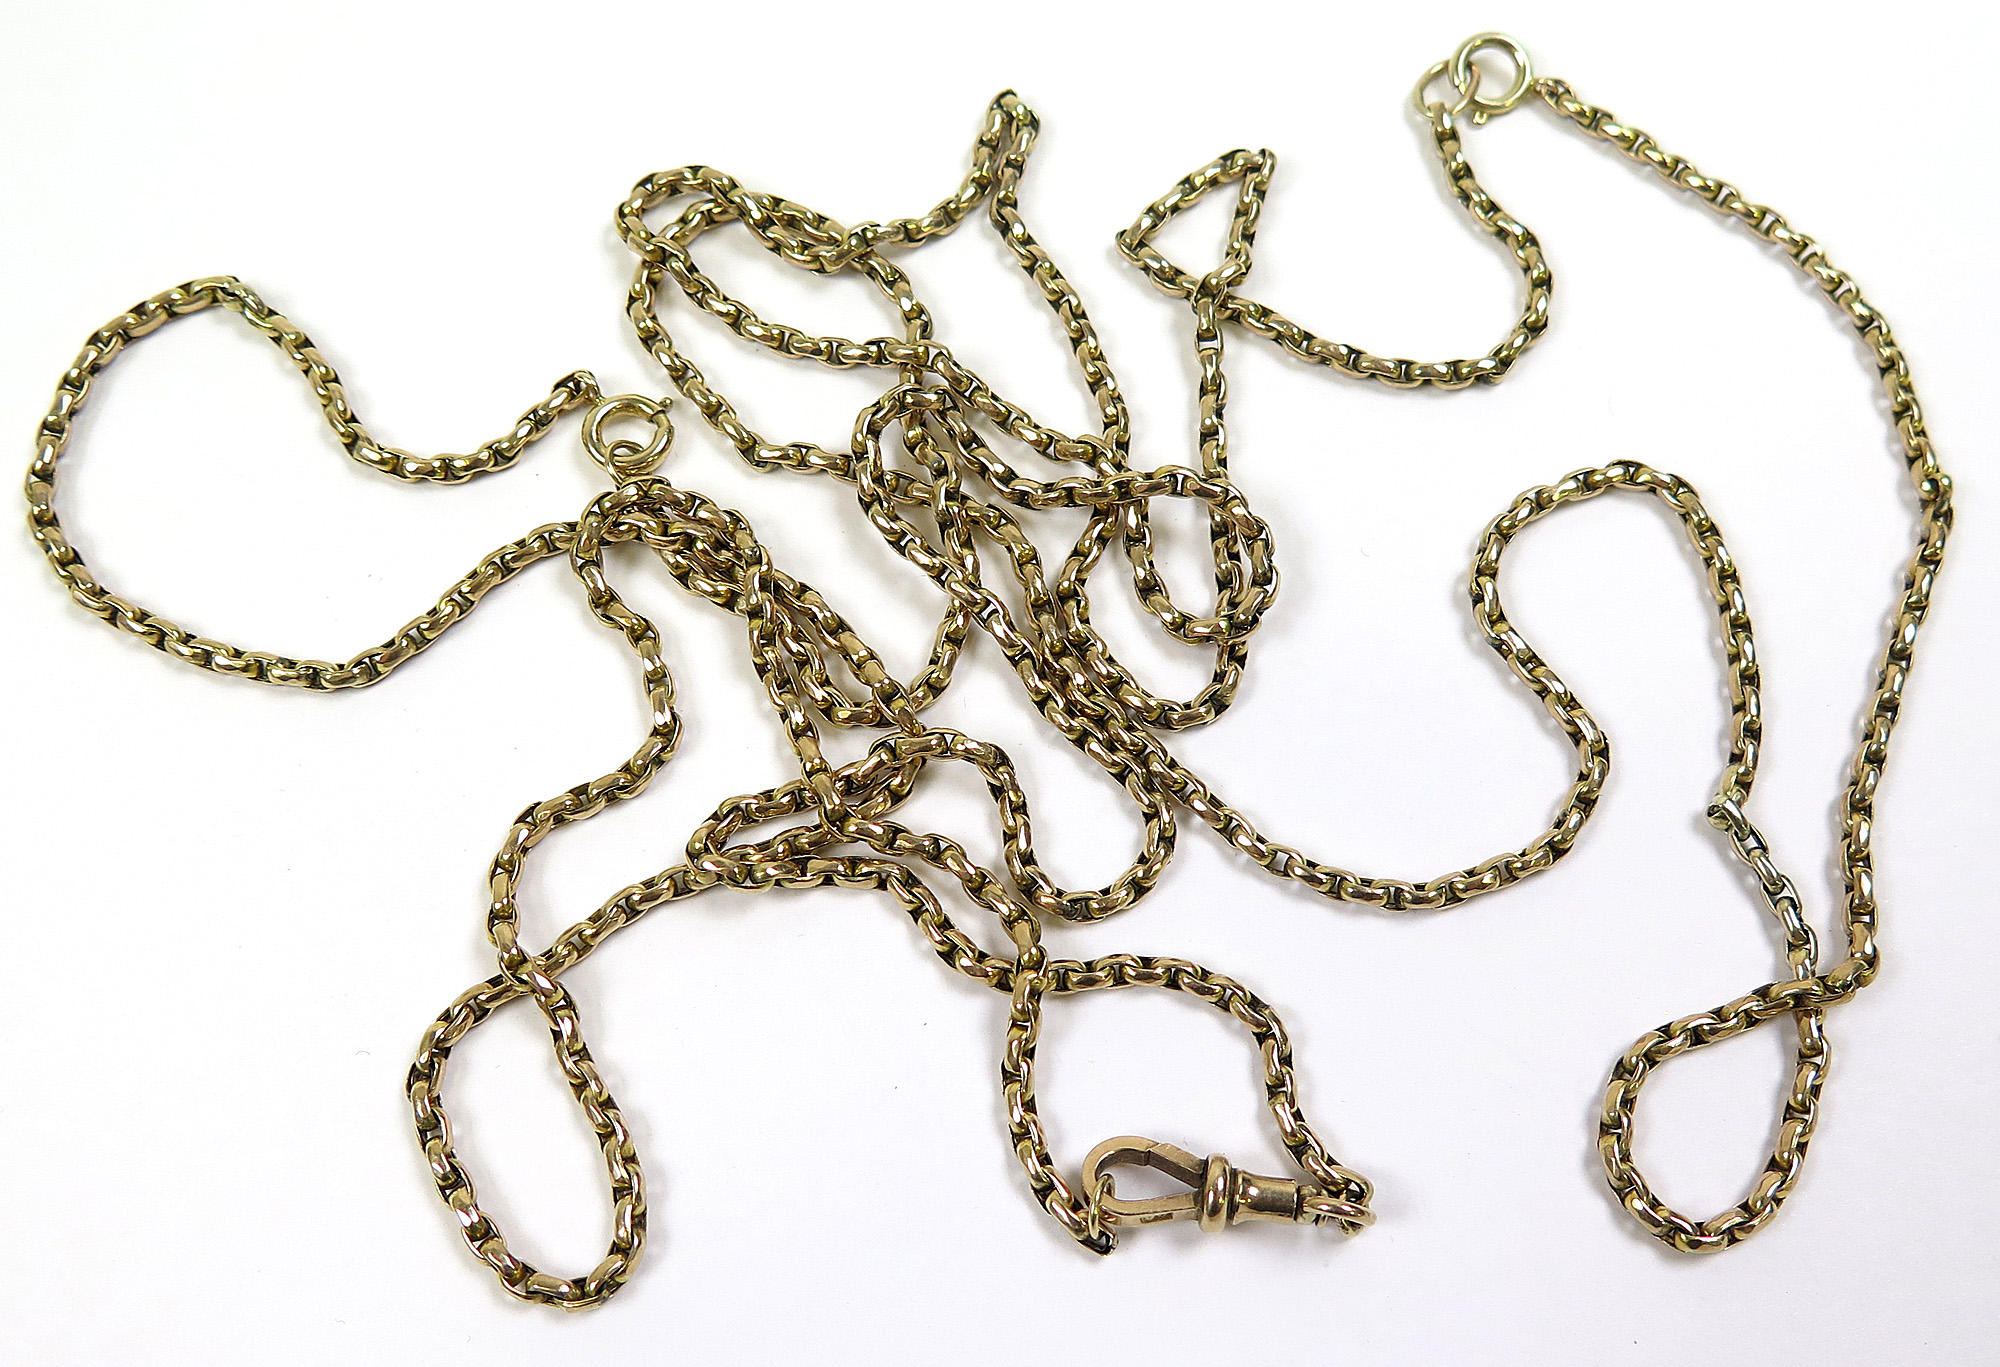 9ct Gold Muff Chain which has been converted to 2 chains at some time weight 29.4 grams